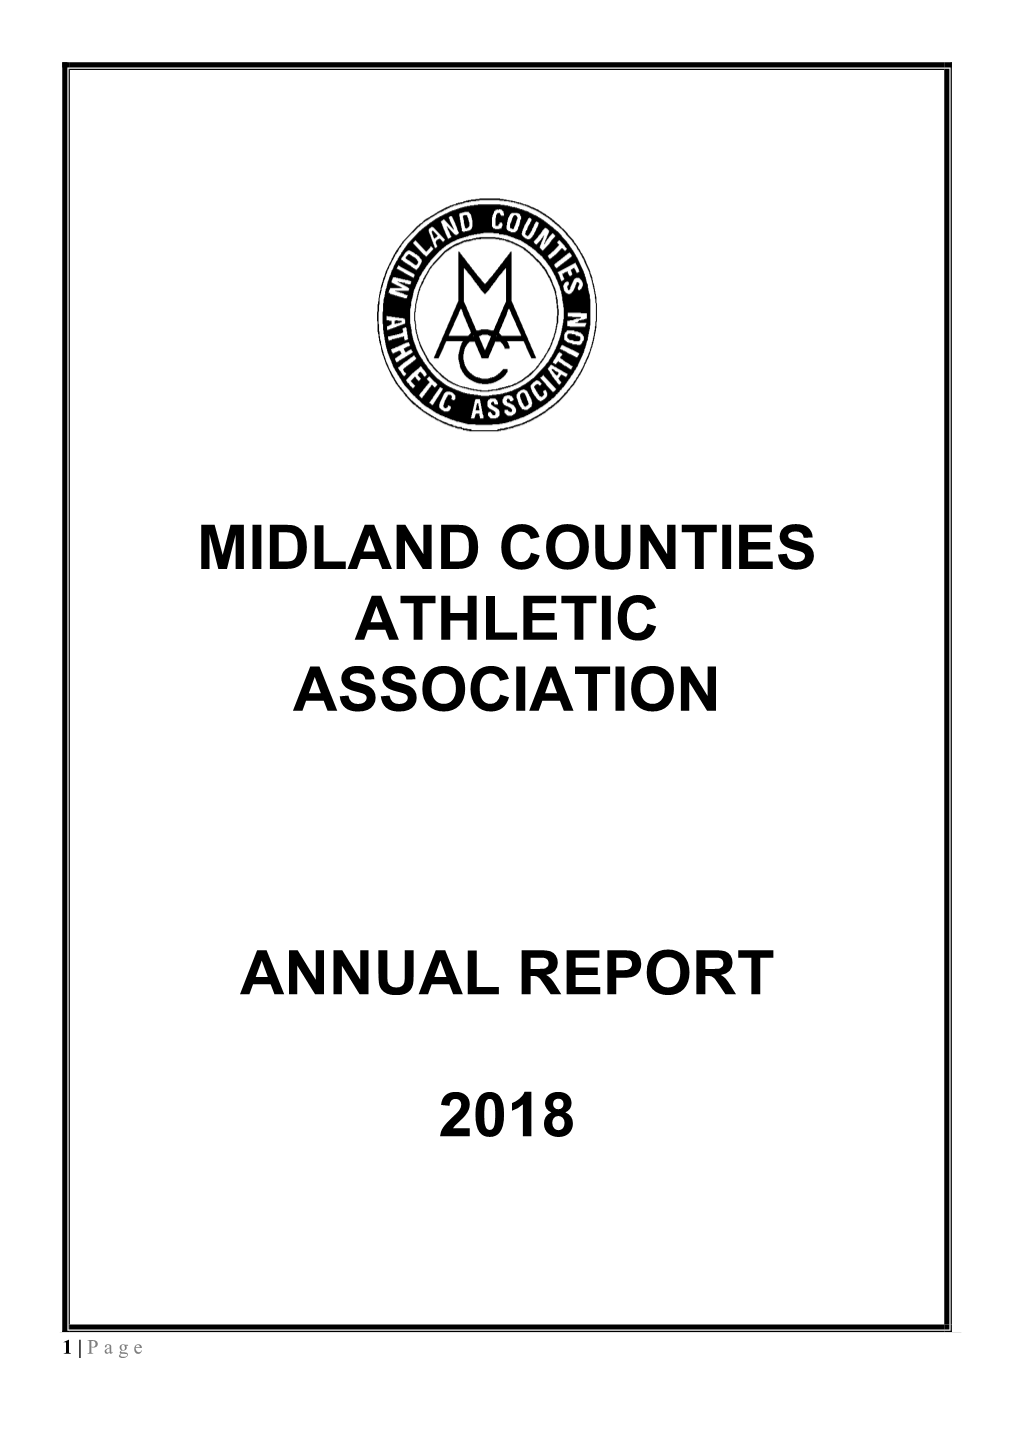 Midland Counties Athletic Association Annual Report